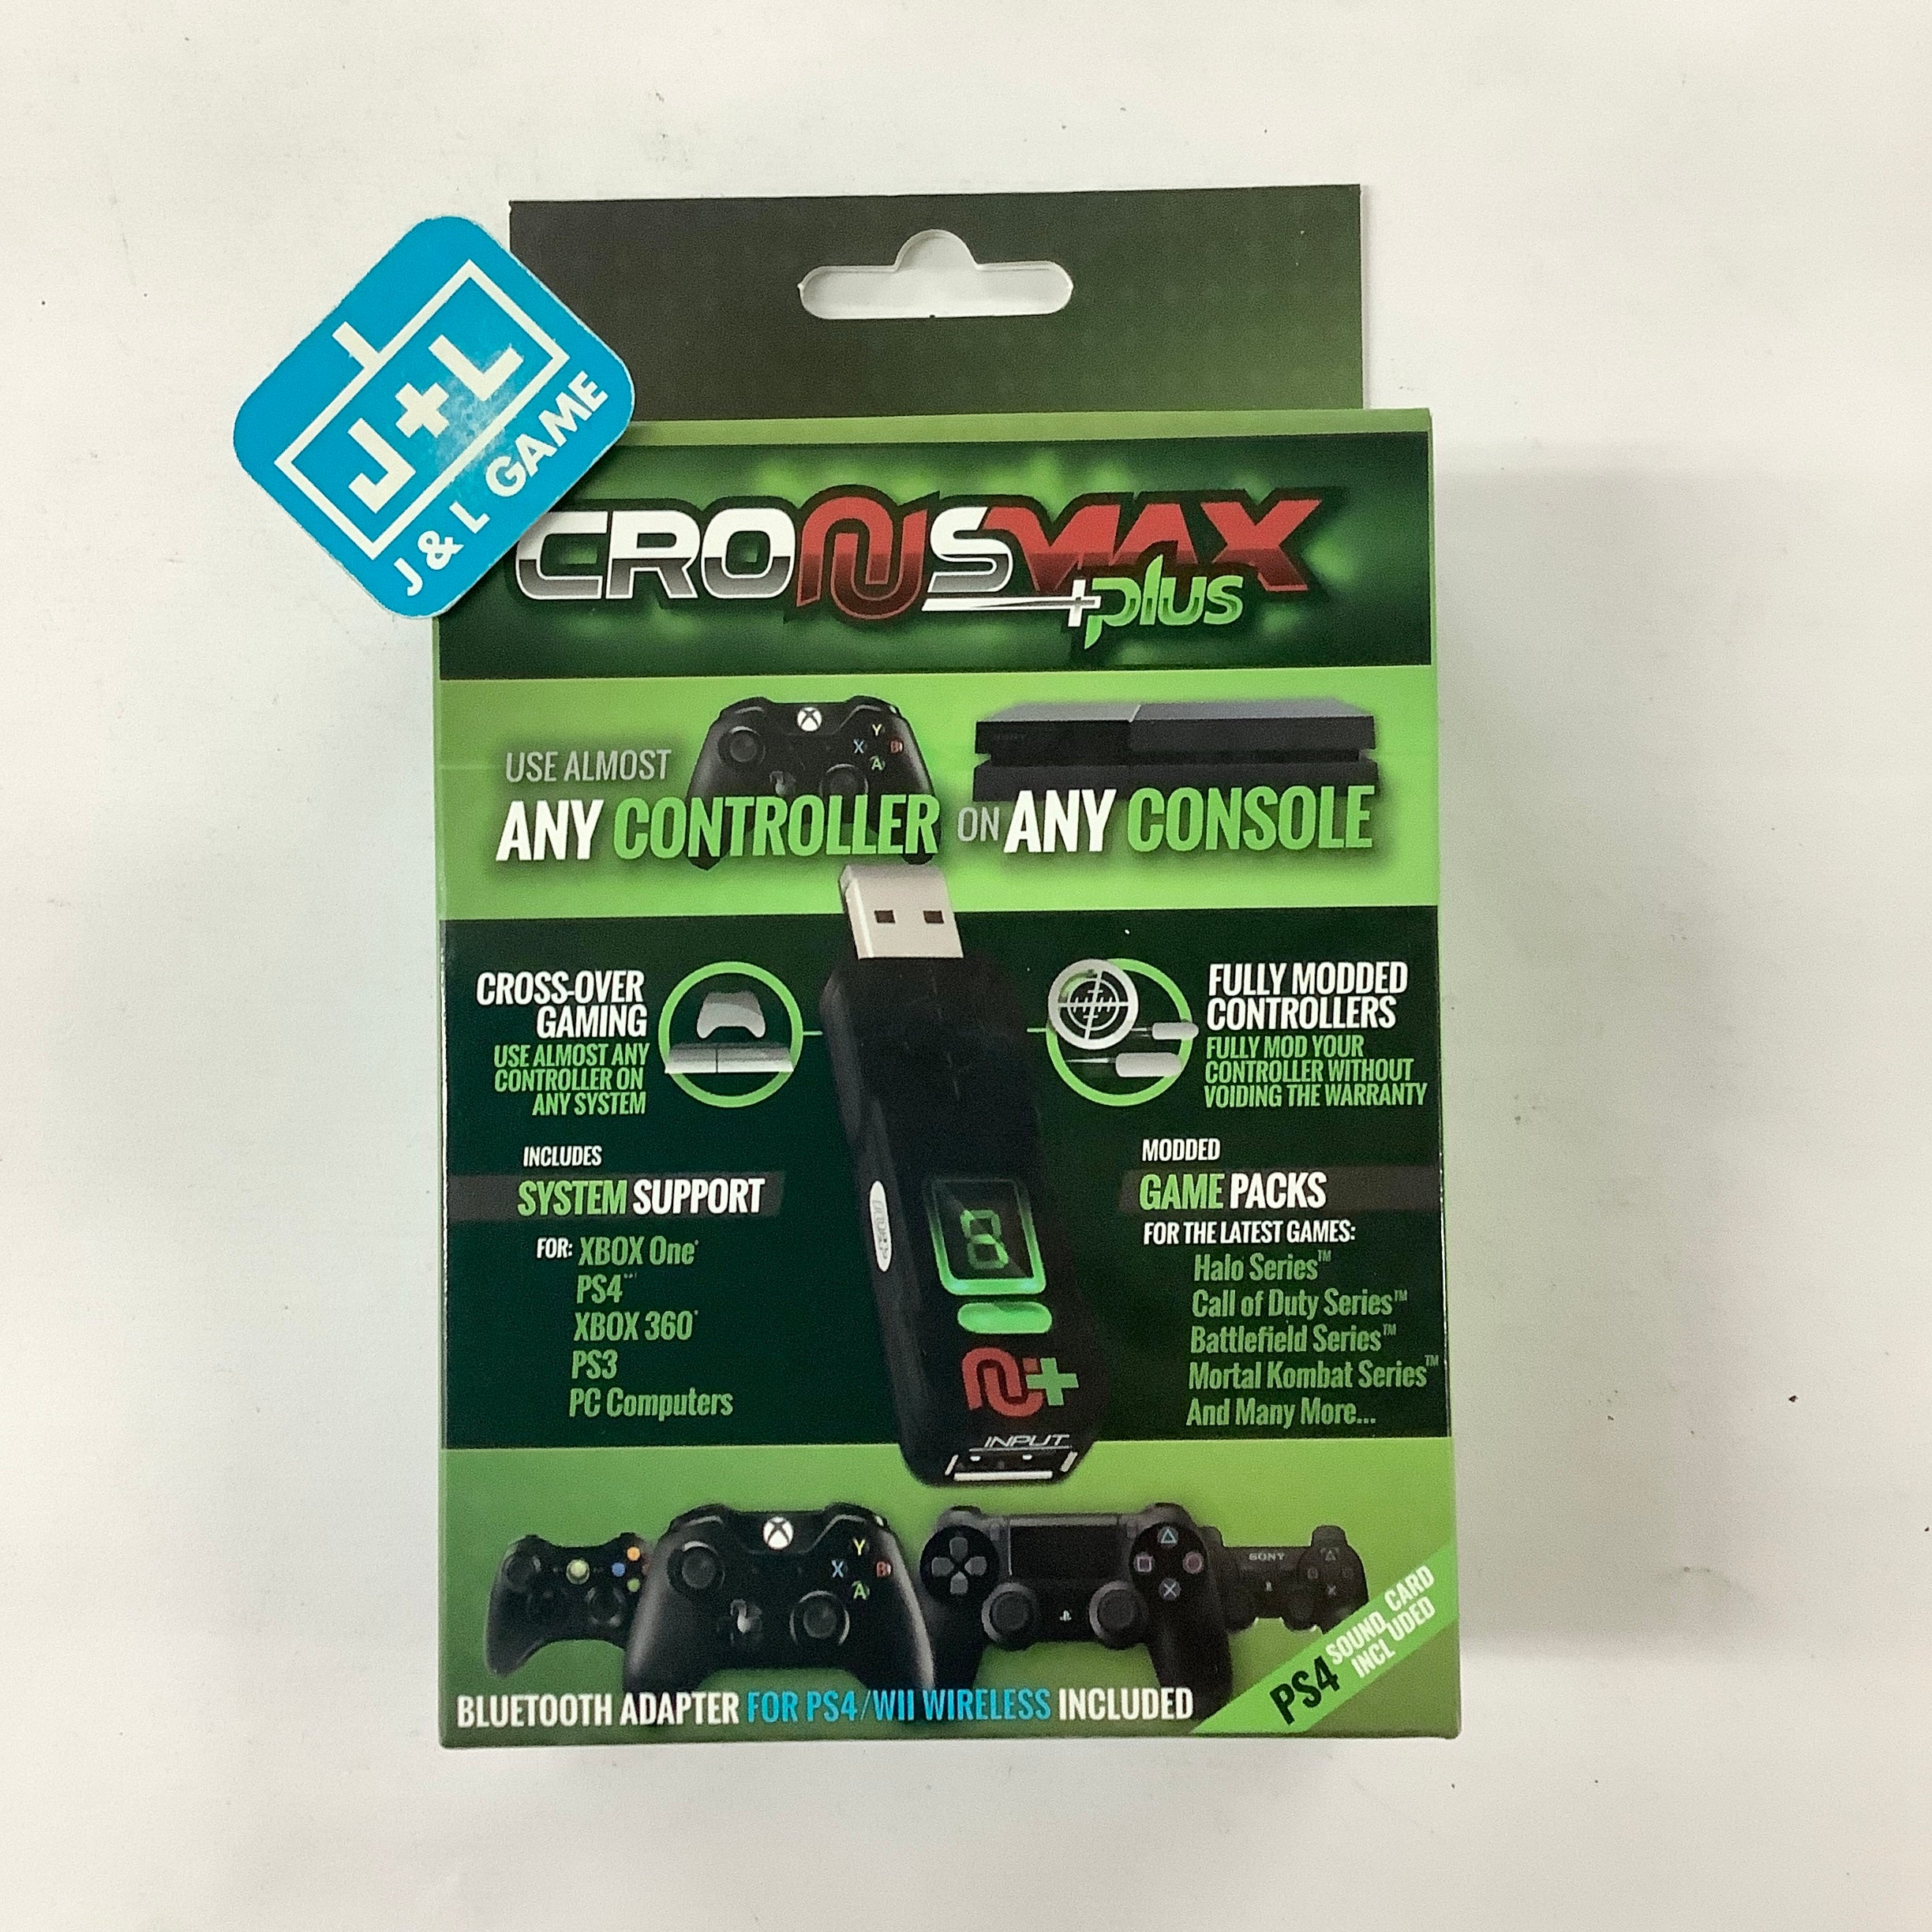 CronusMax Plus Cross Cover Gaming Adapter for PS4 PS3 Xbox One Xbox 360 Windows PC Accessories CronusMax   